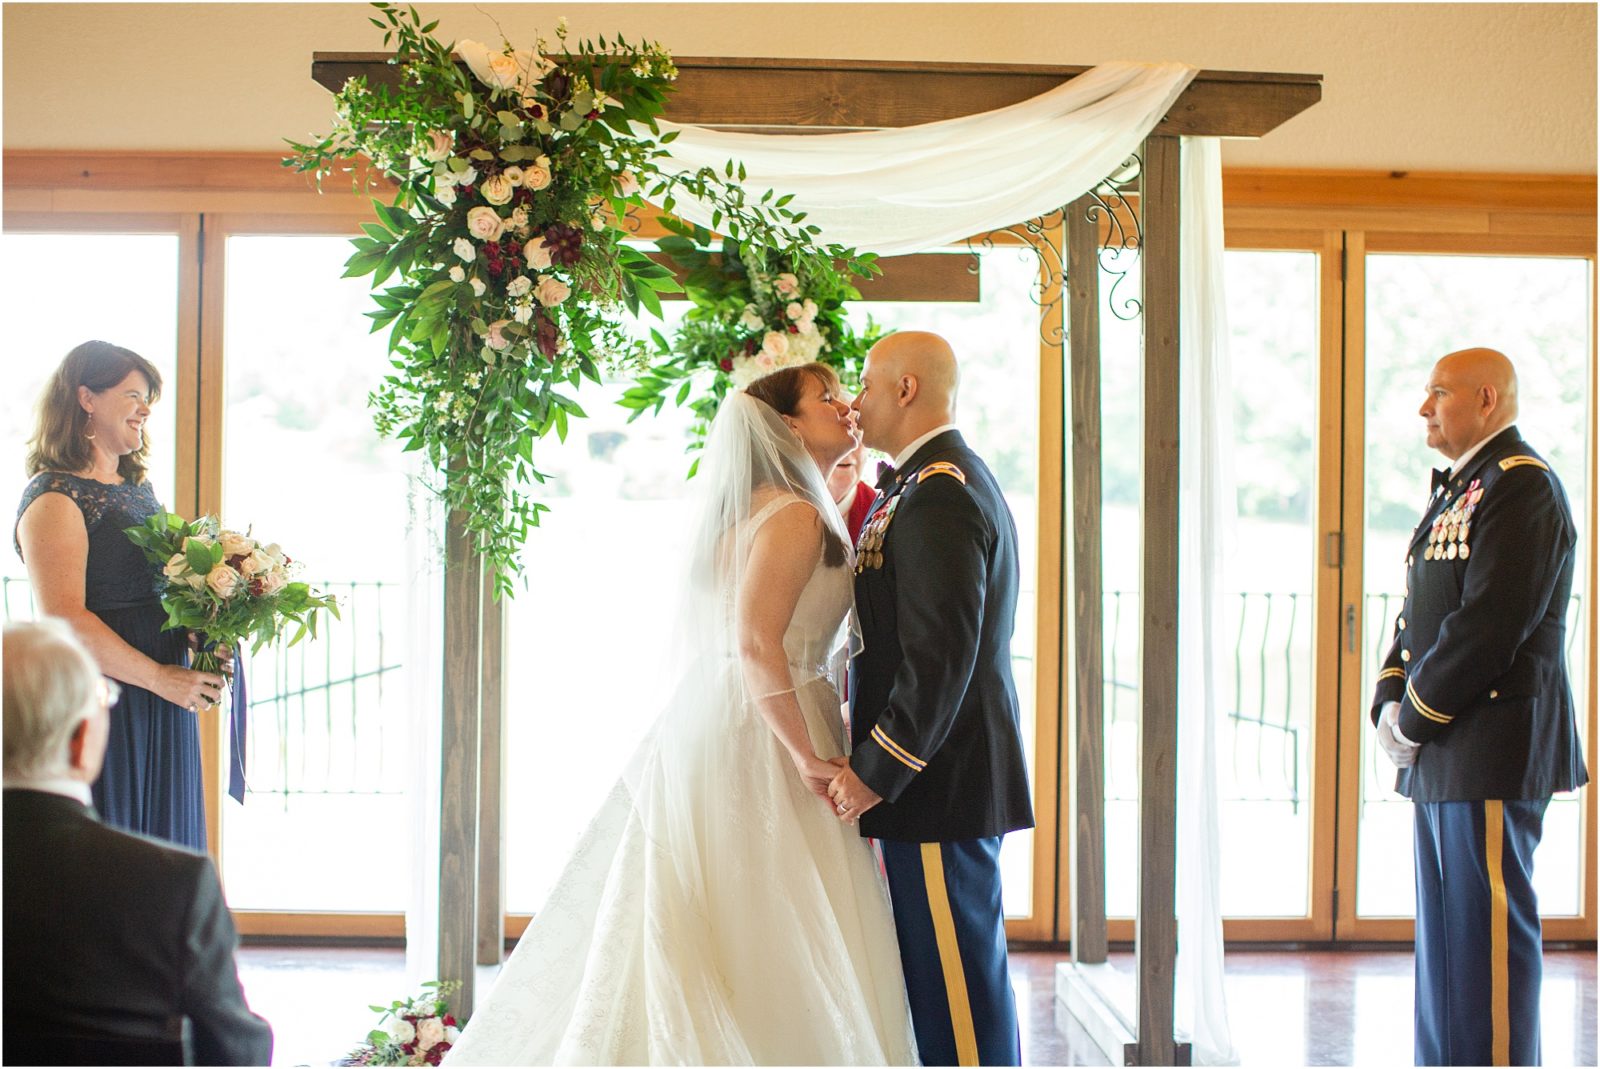 First kiss between bride and husband